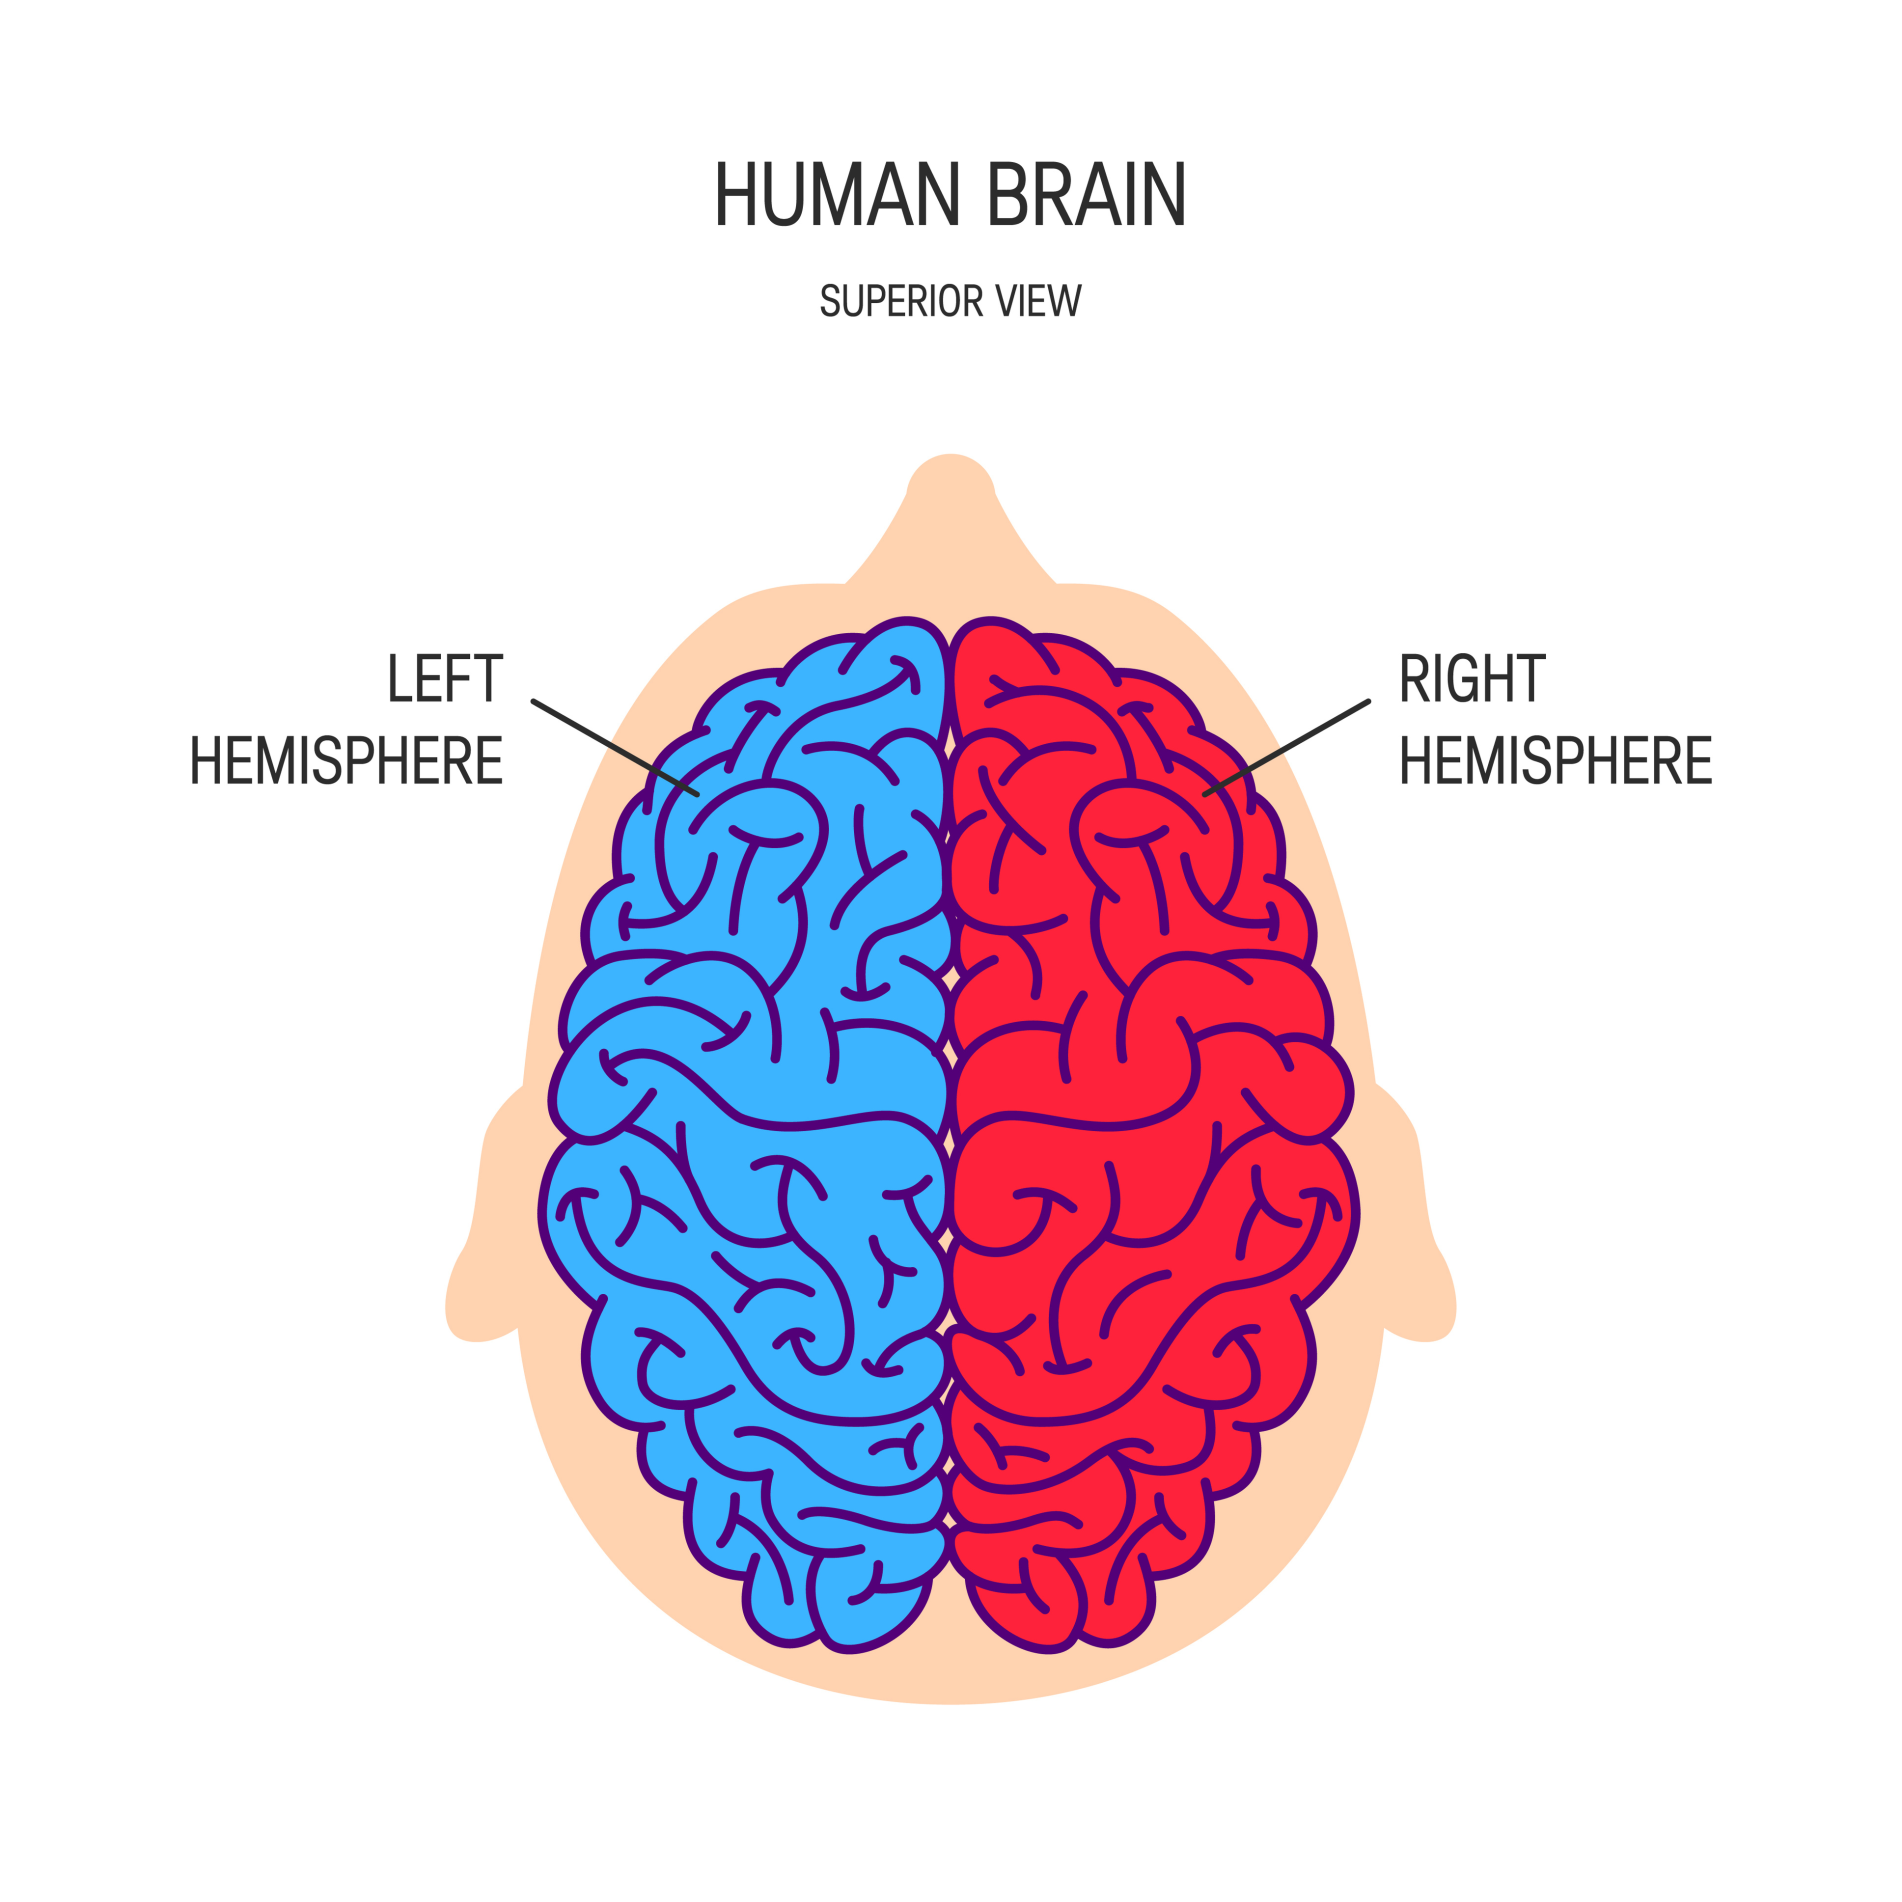 The cerebrum is divided into left and right hemispheres. The two sides are connected by the nerve fibers corpus callosum.